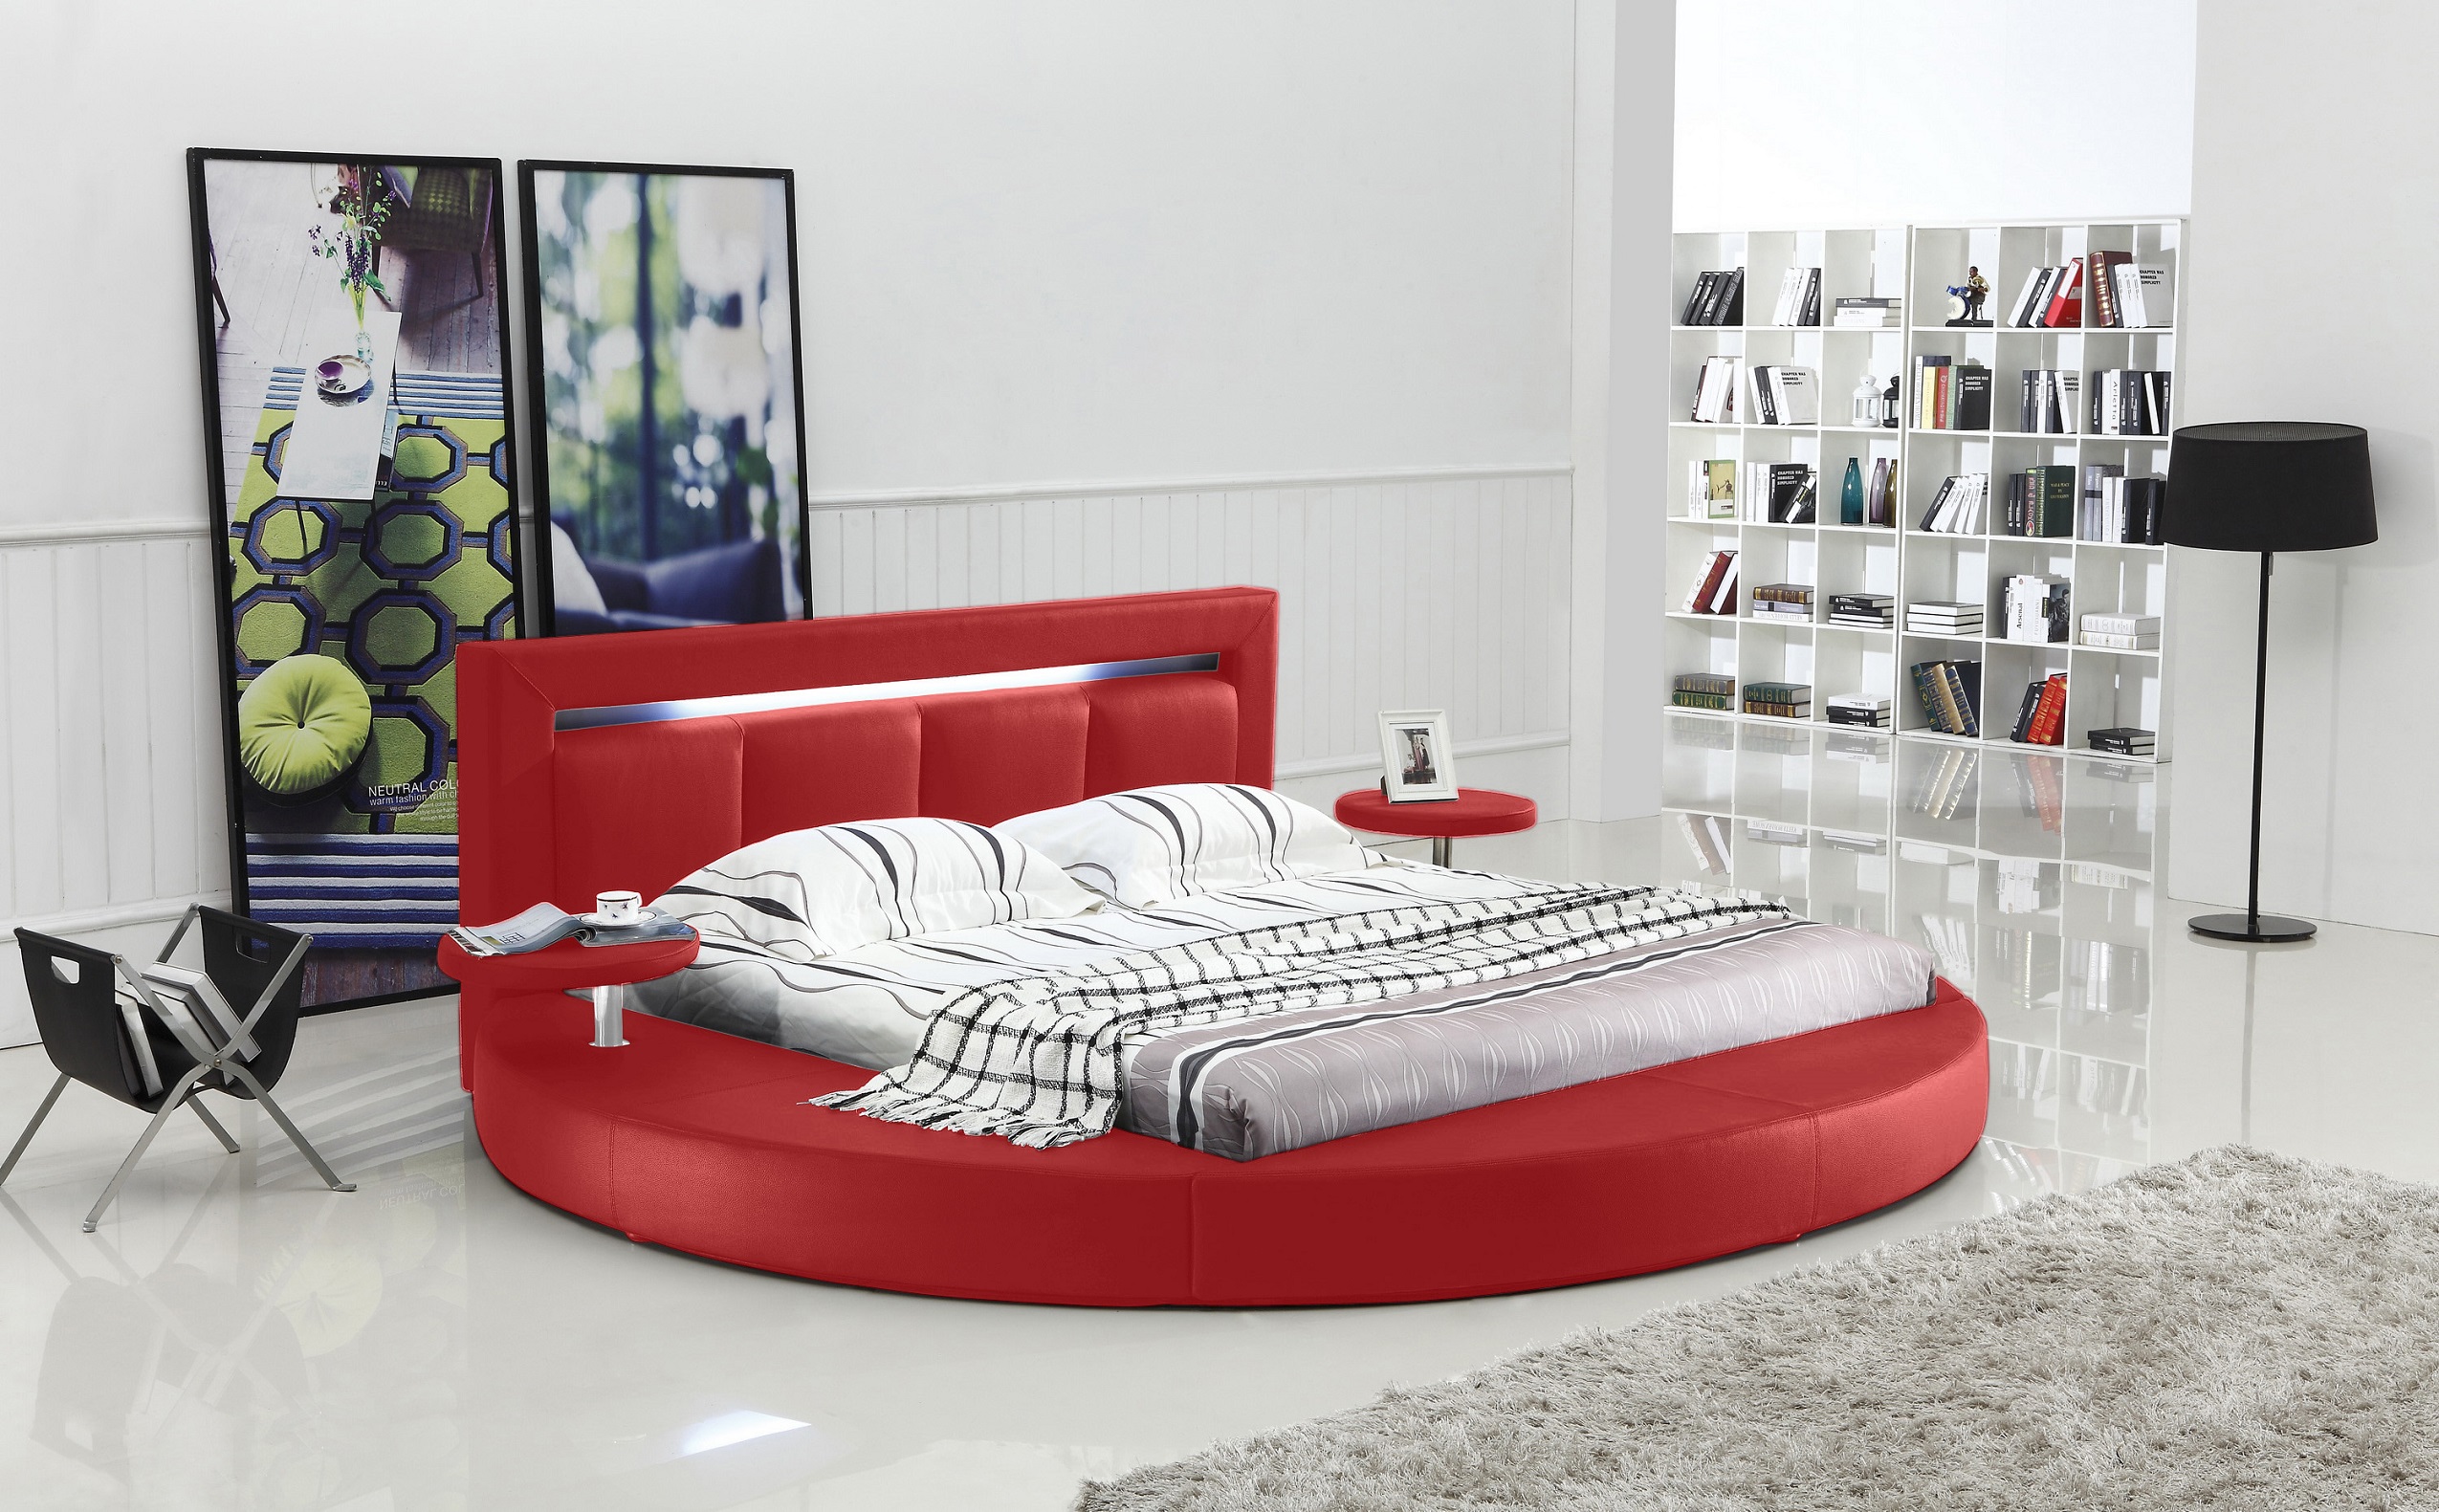 Oslo Round Bed With Headboard Lights, Round Leather Bed